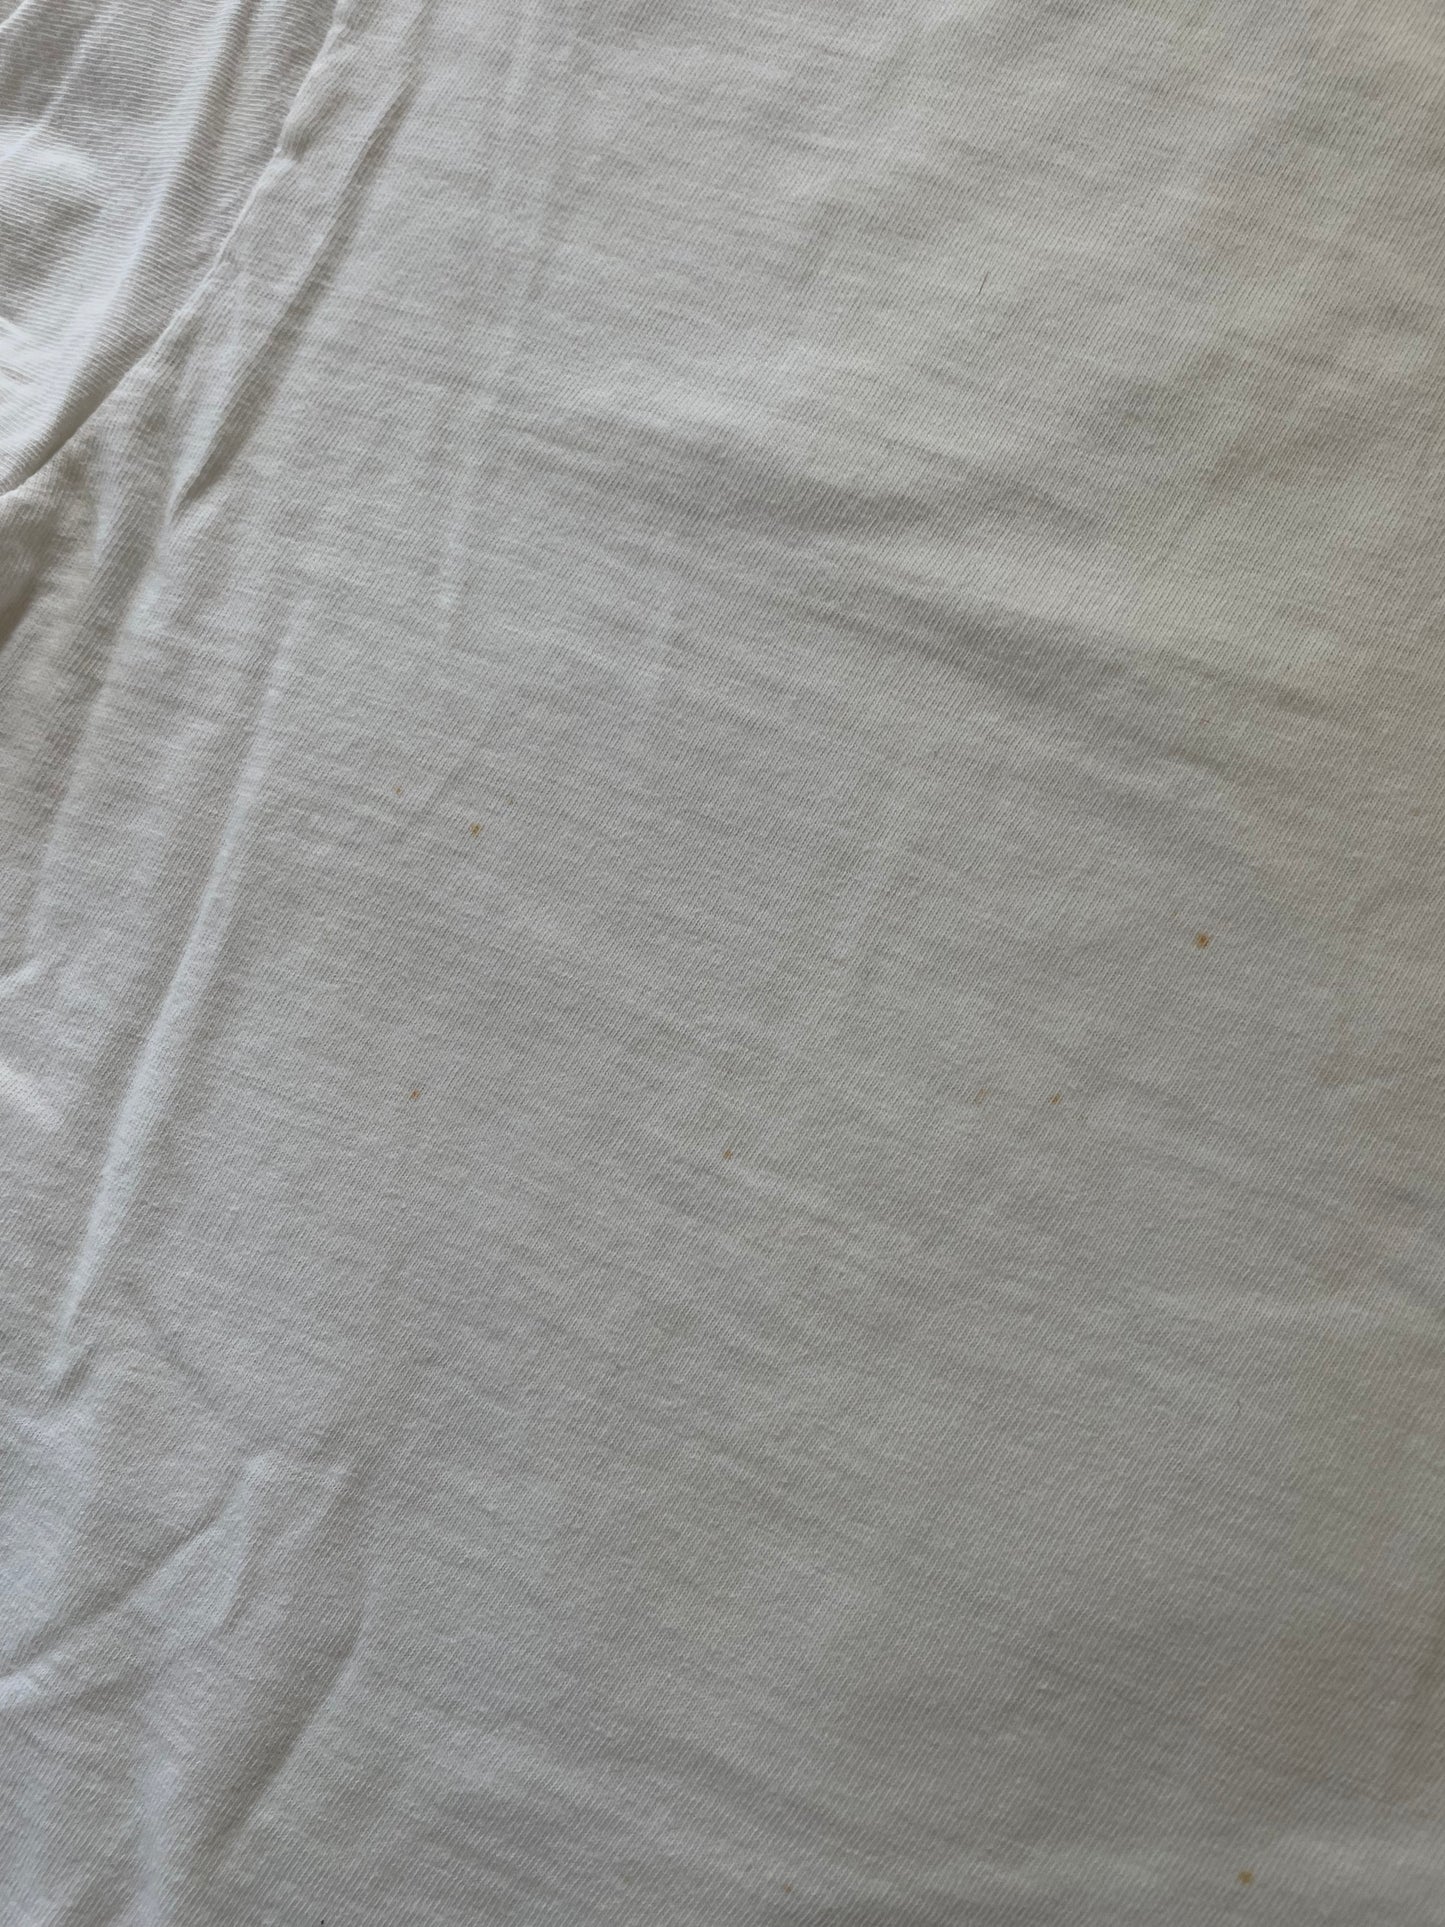 80s JCPenney Blank White Tee